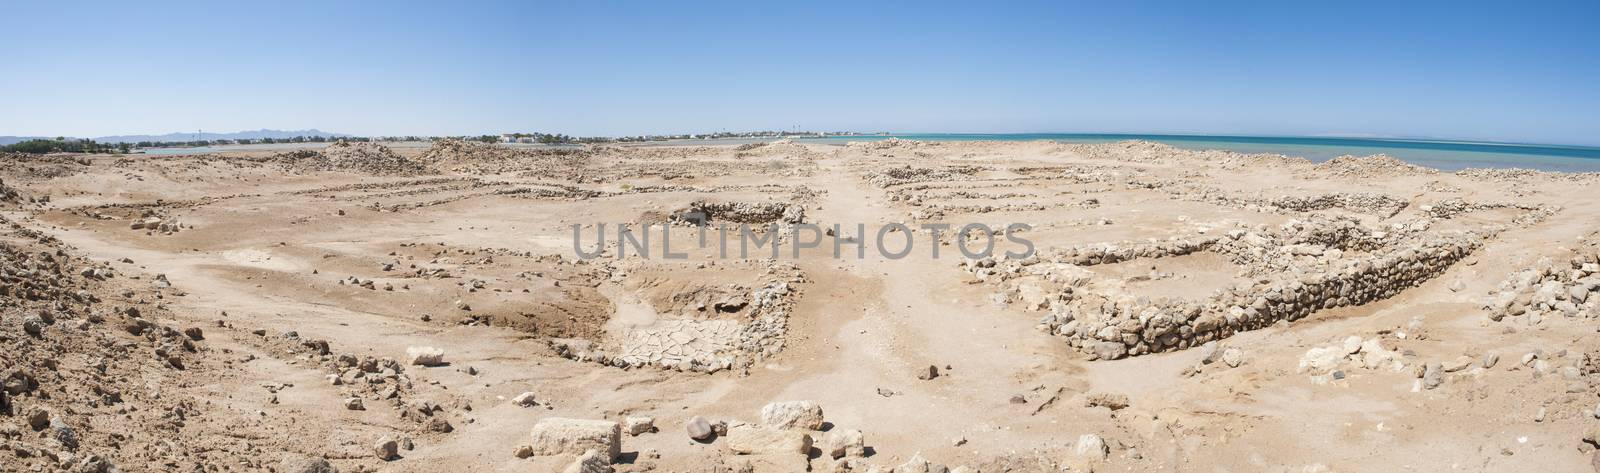 Remains of old abandoned roman fort ruins on Red Sea coastline